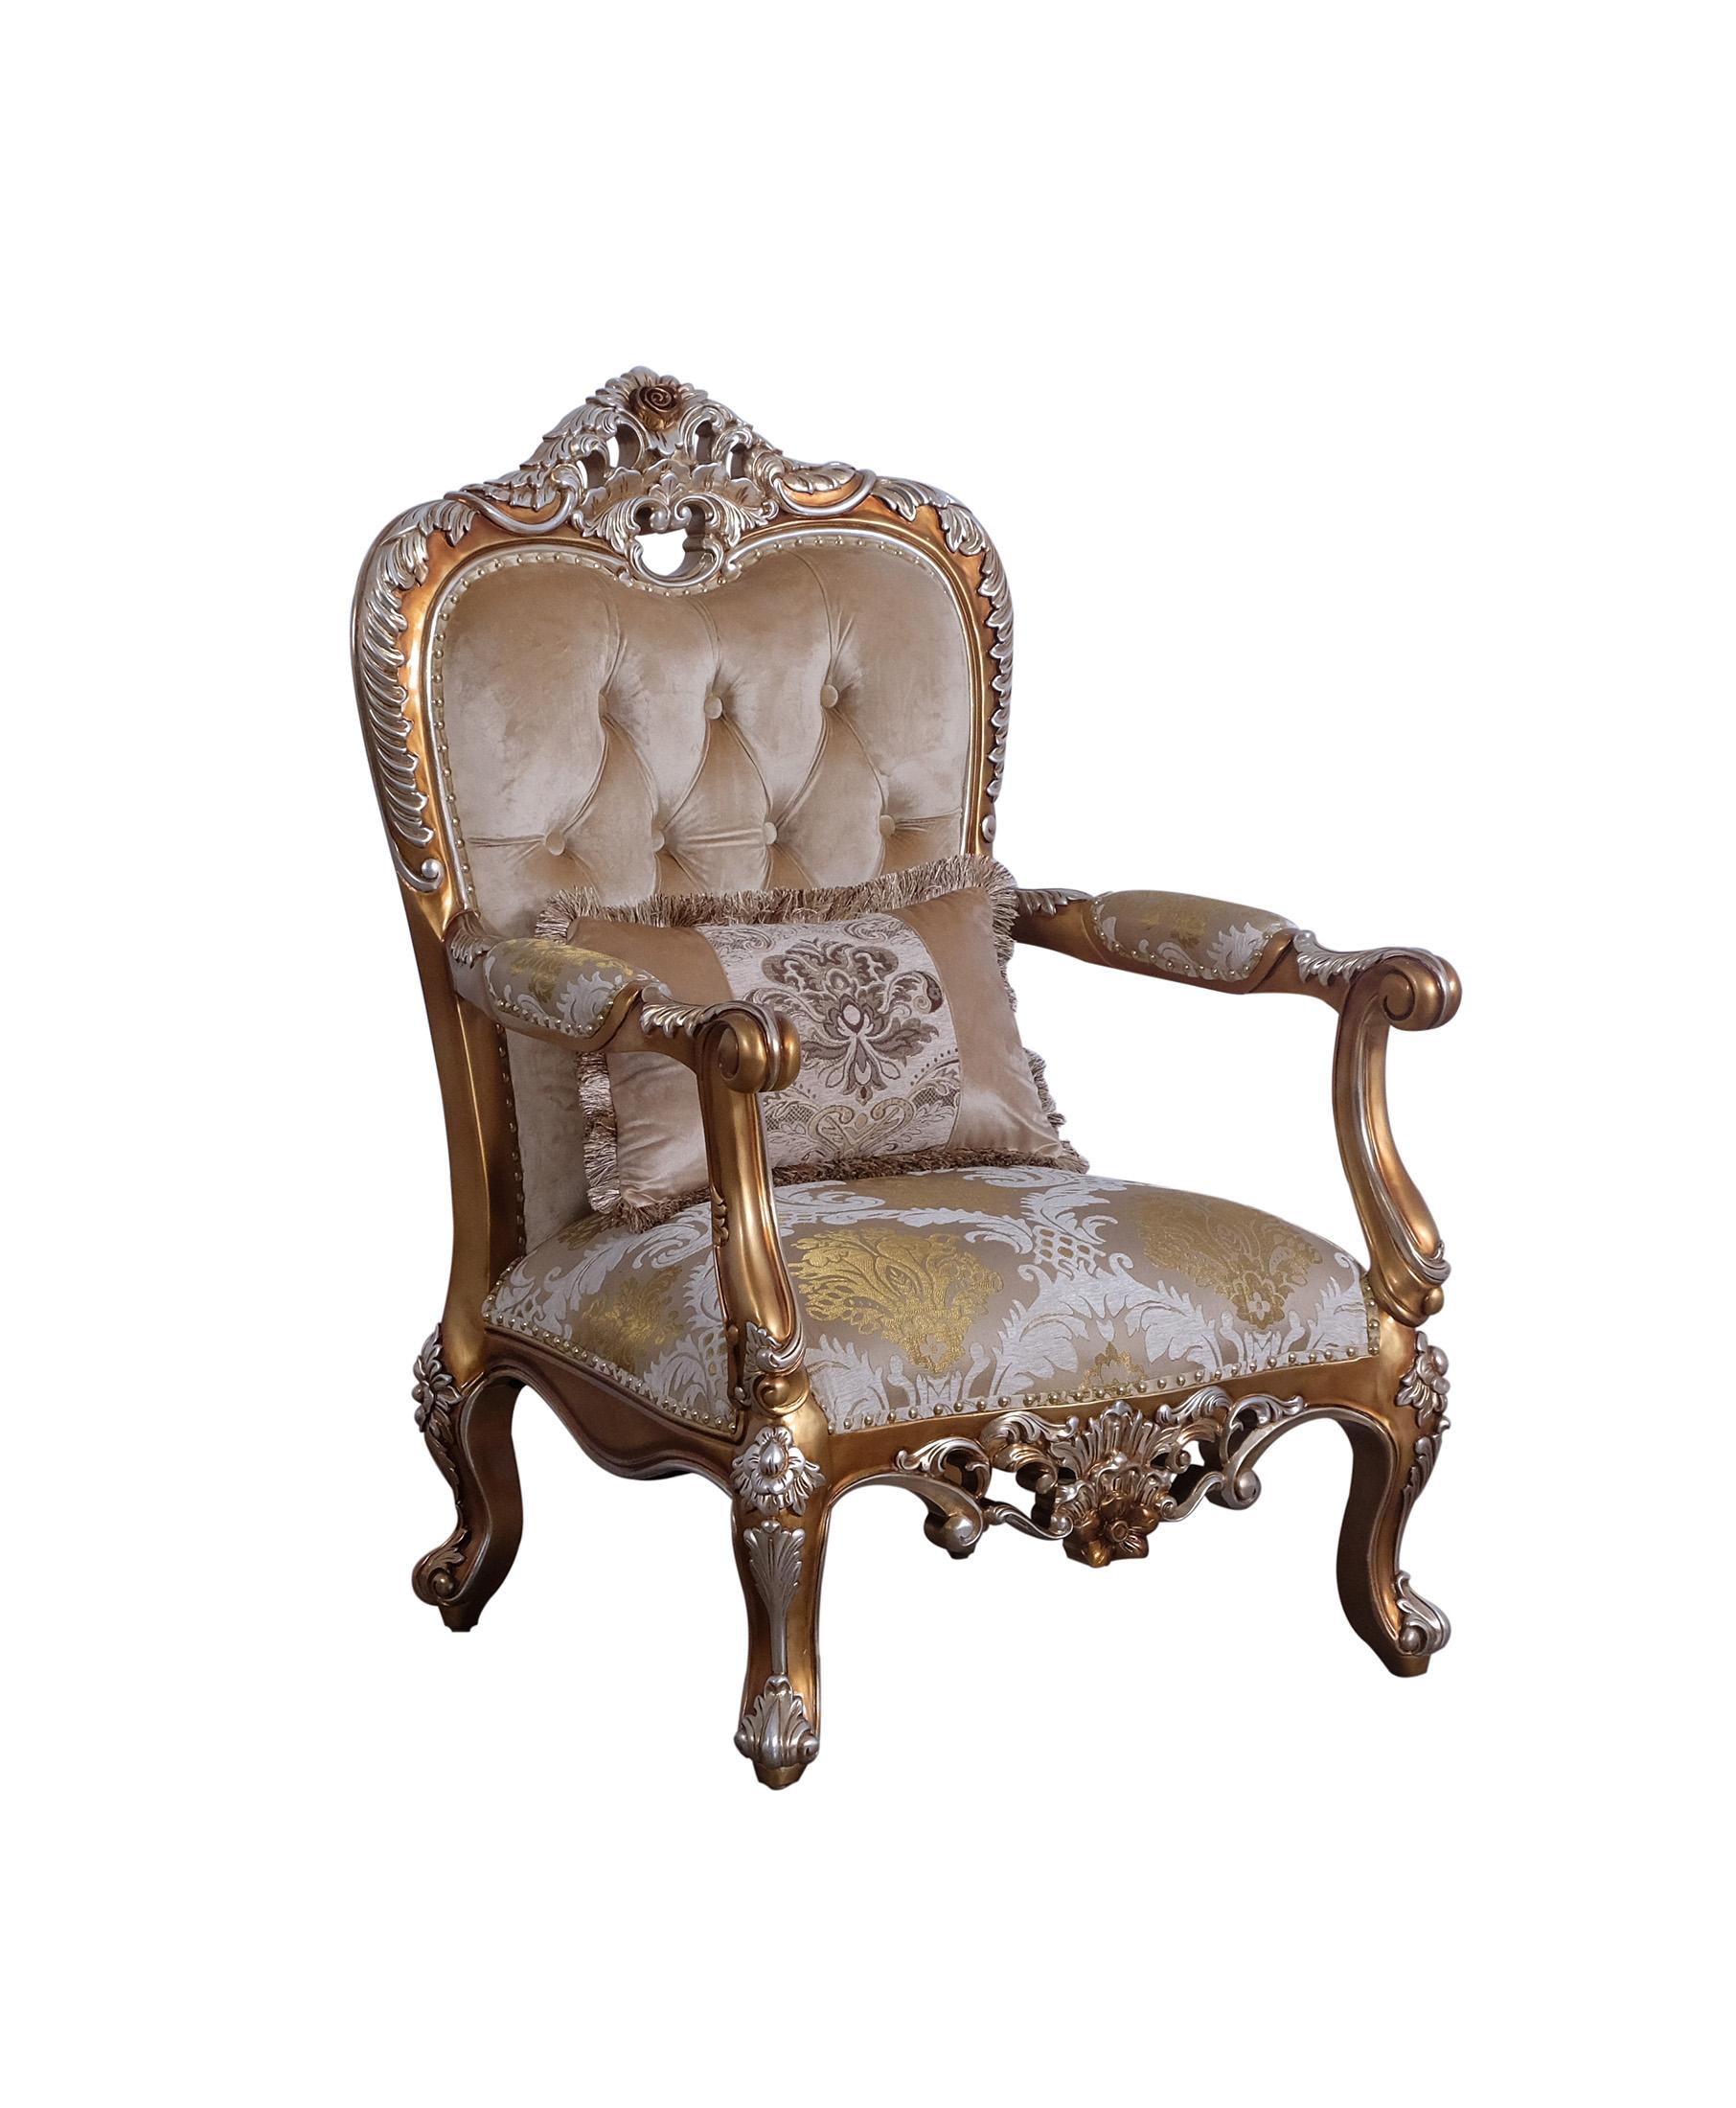 Classic, Traditional Arm Chair SAINT GERMAIN 35550-C in Sand, Gold Fabric